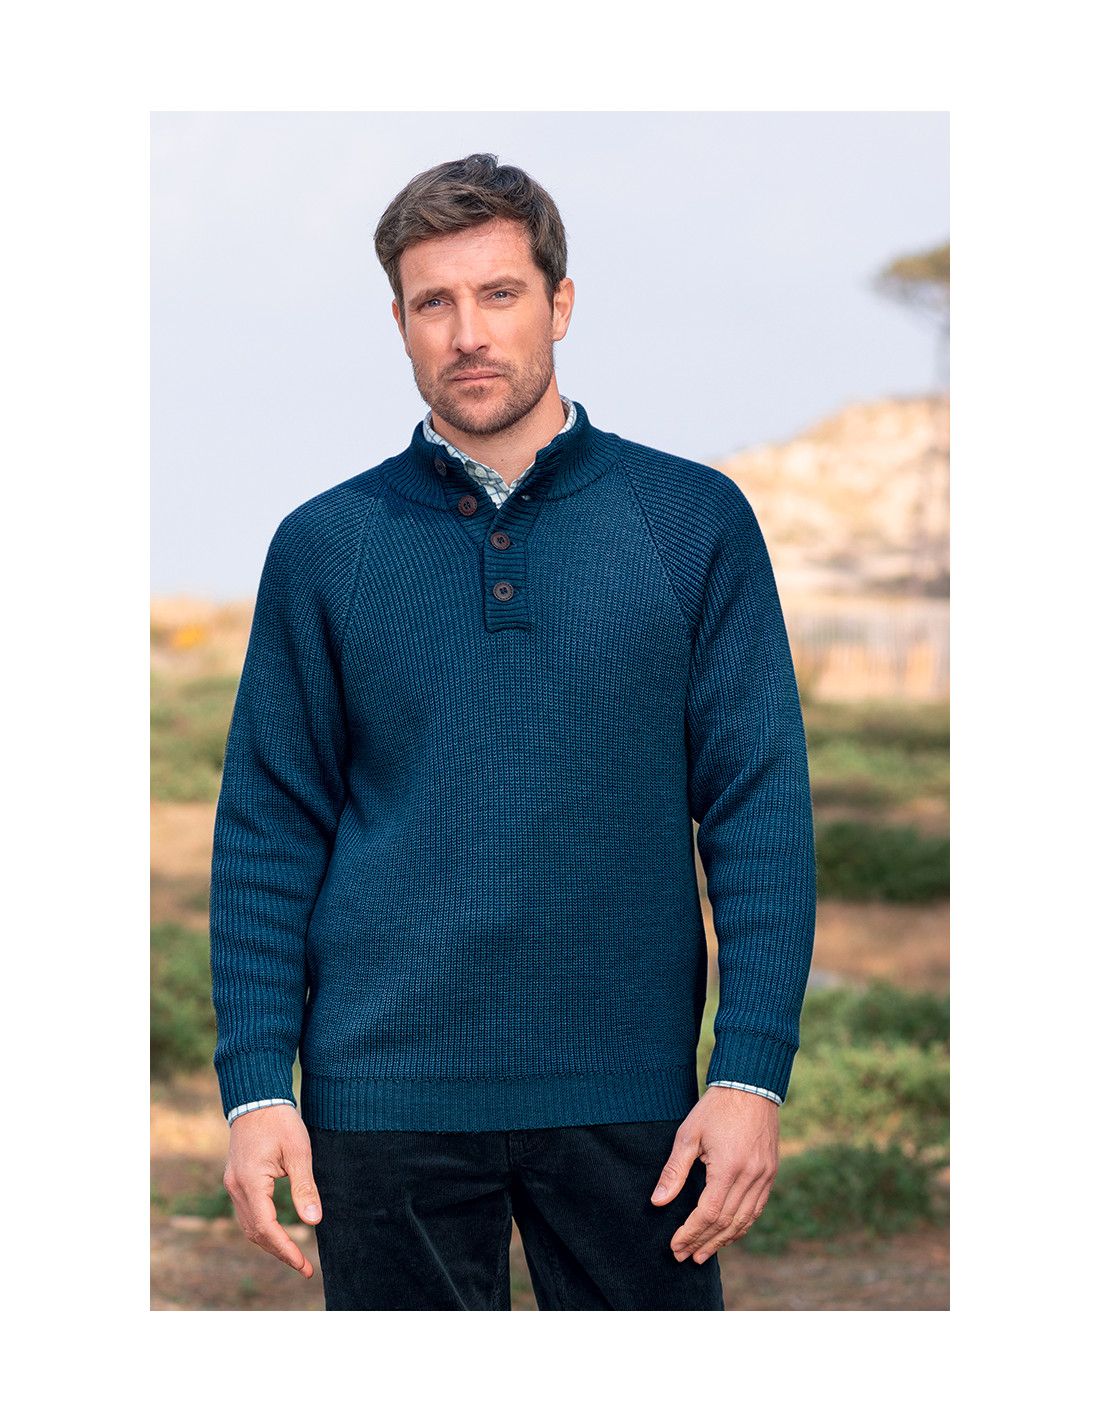 Pull Chaud Made in France⎪B. Solfin